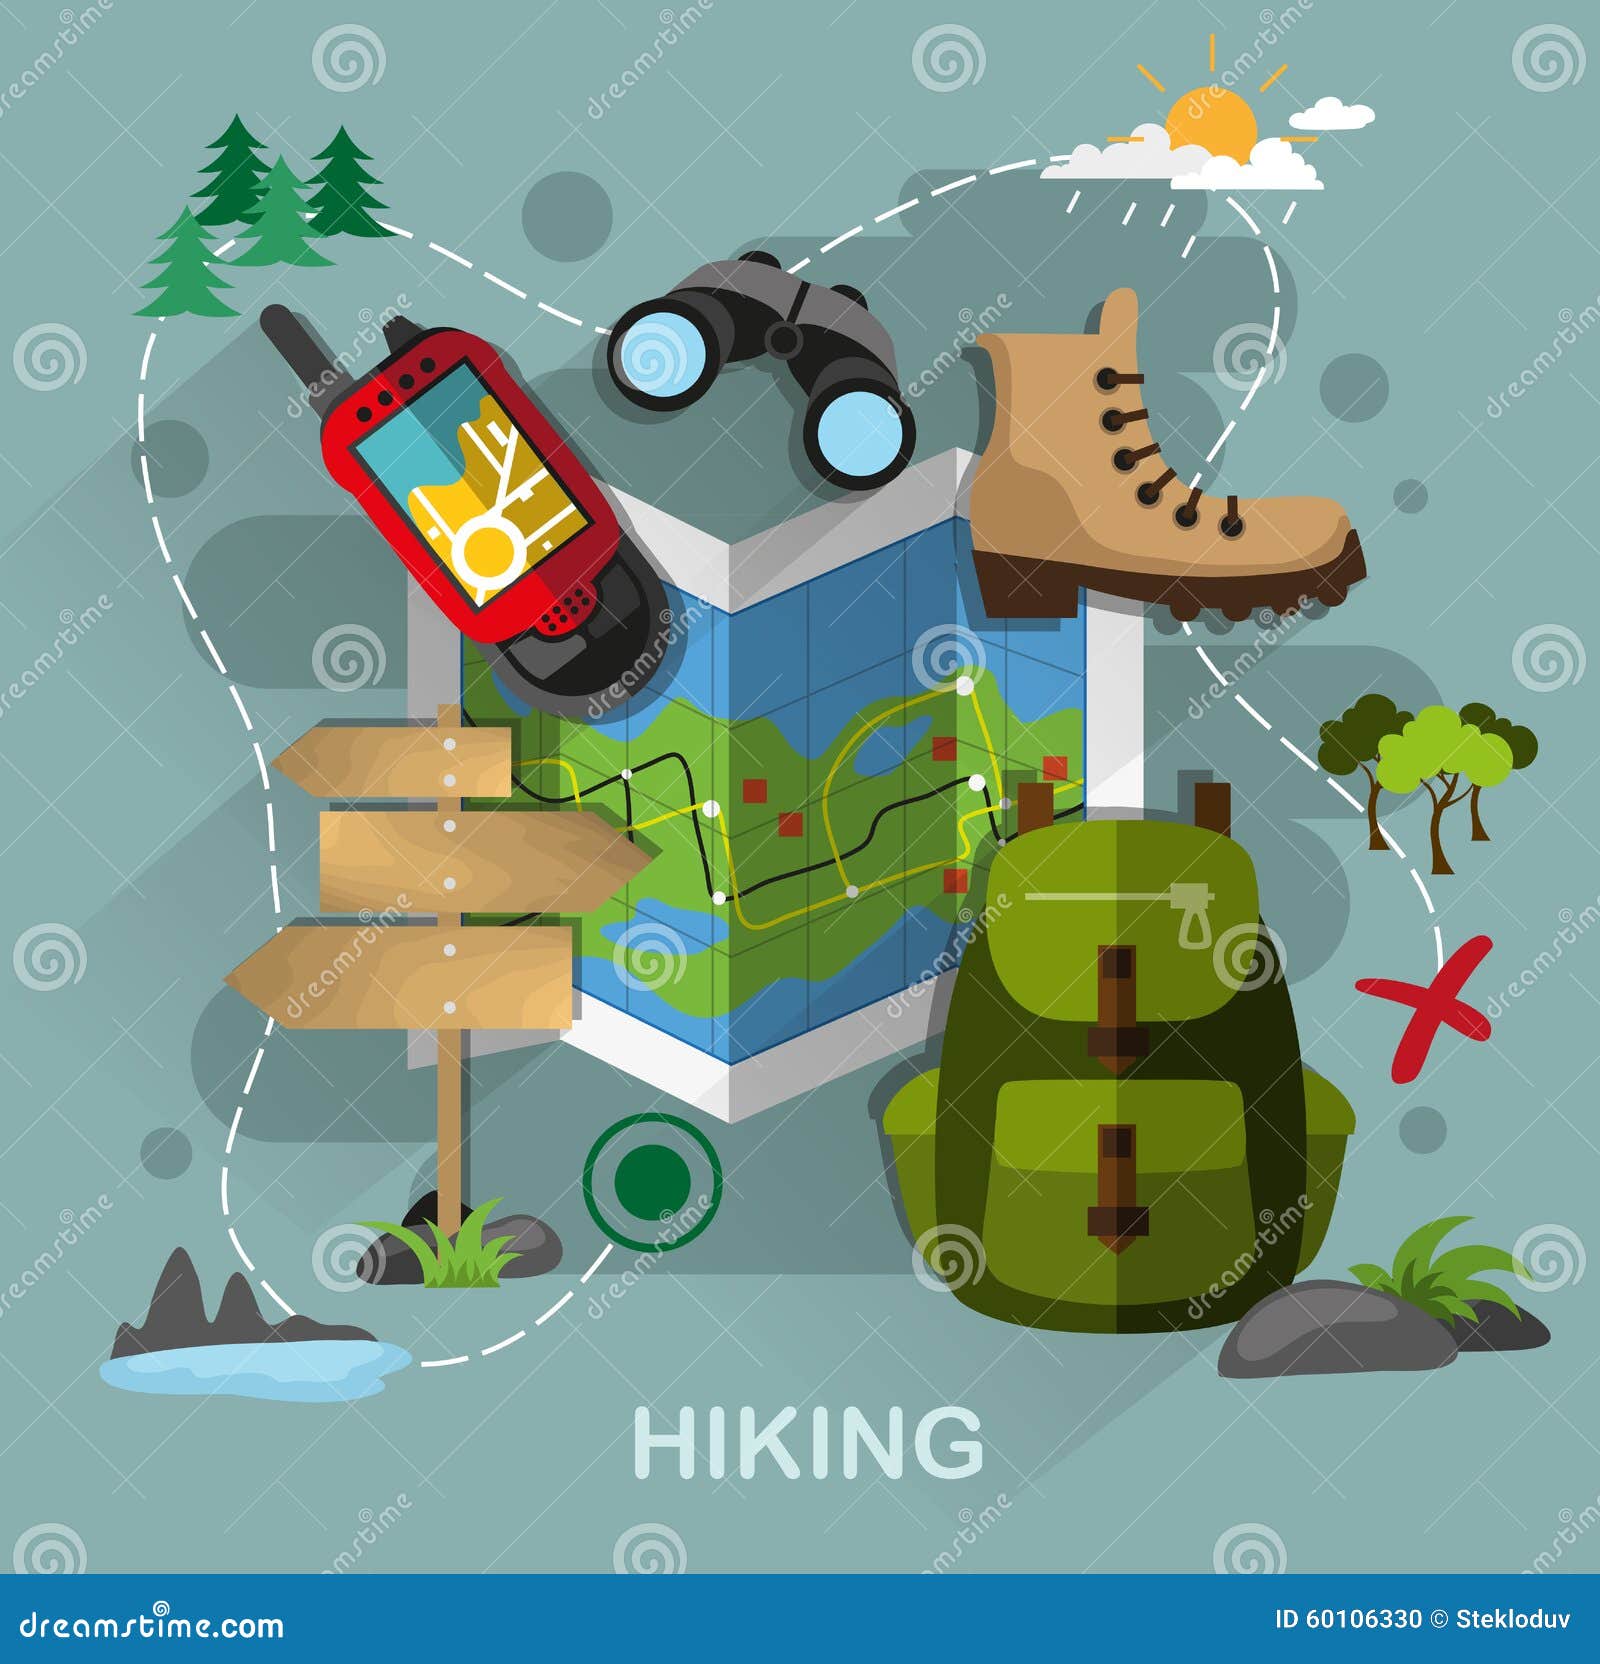 Hiking equipment stock vector. Illustration of camping - 60106330